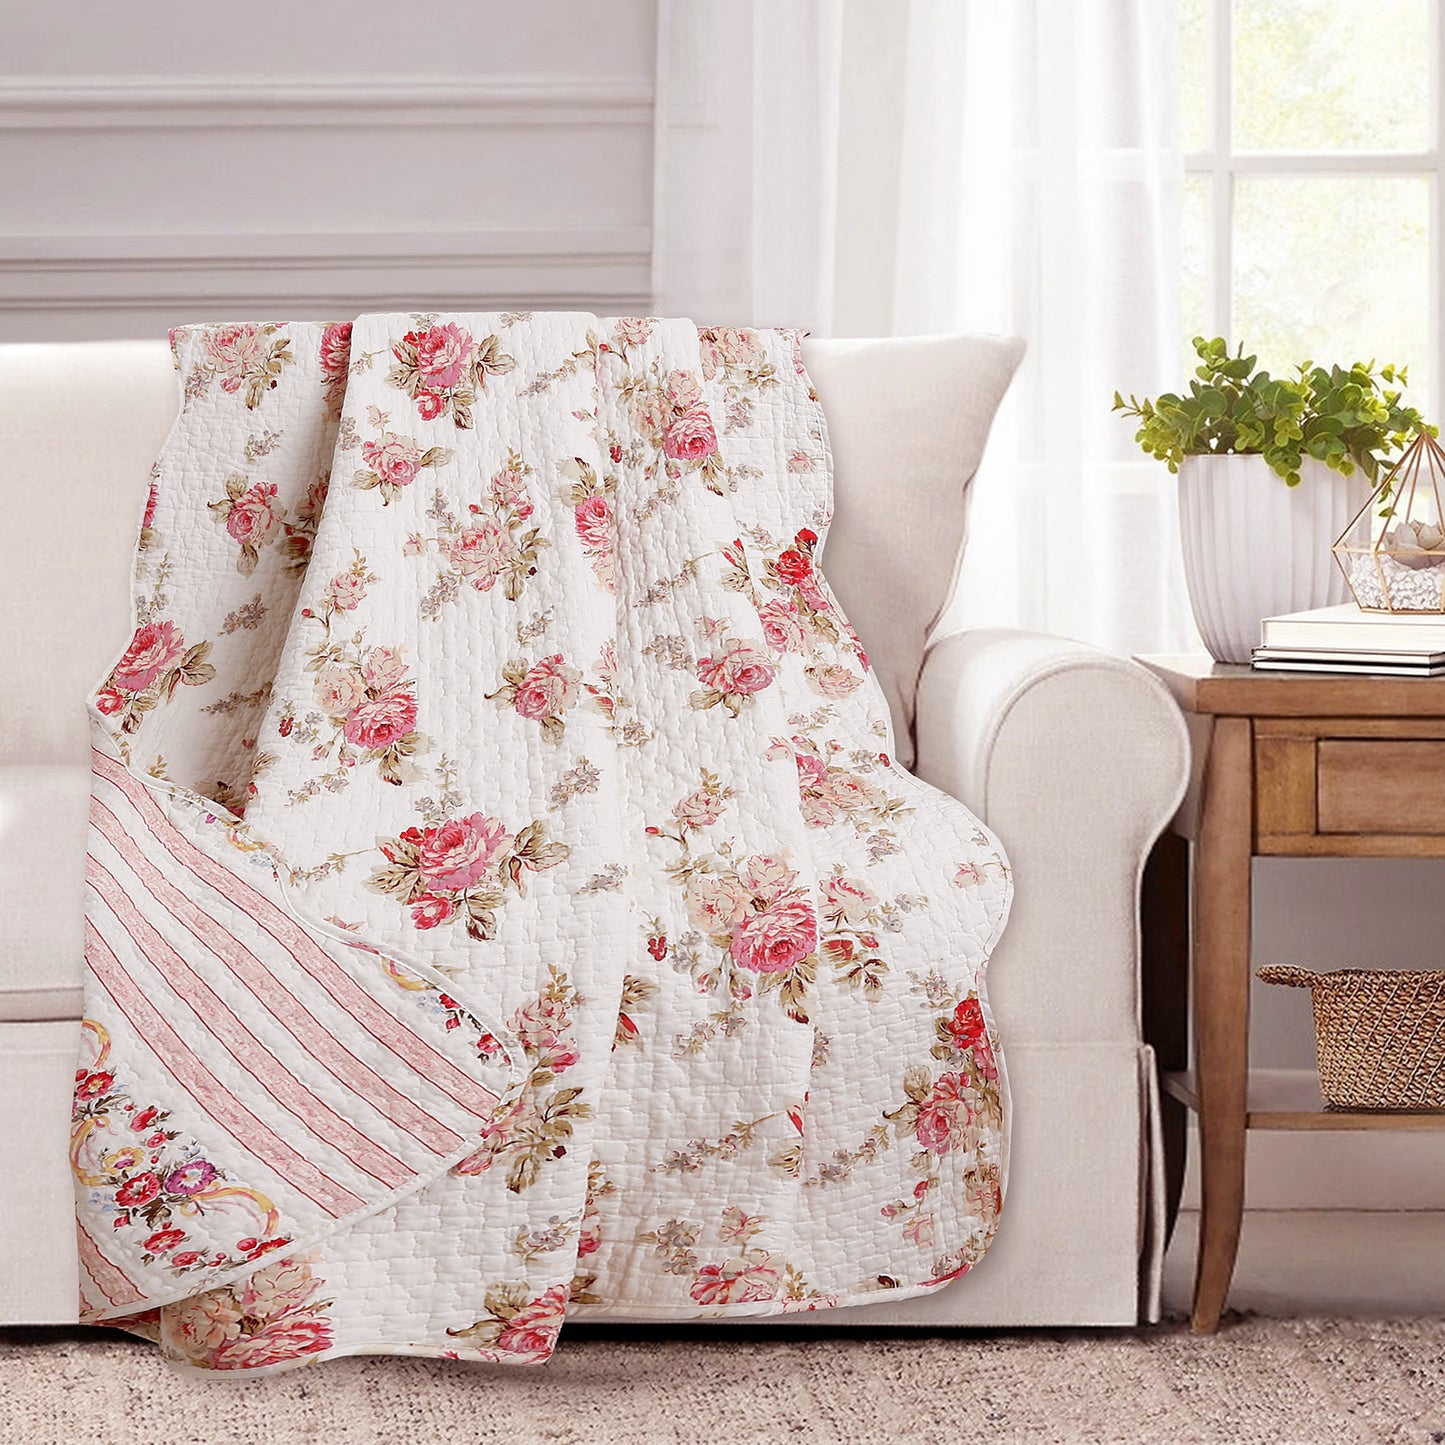 Spring Rose Floral Scalloped Cotton Quilted Reversible Decor Throw Blanket